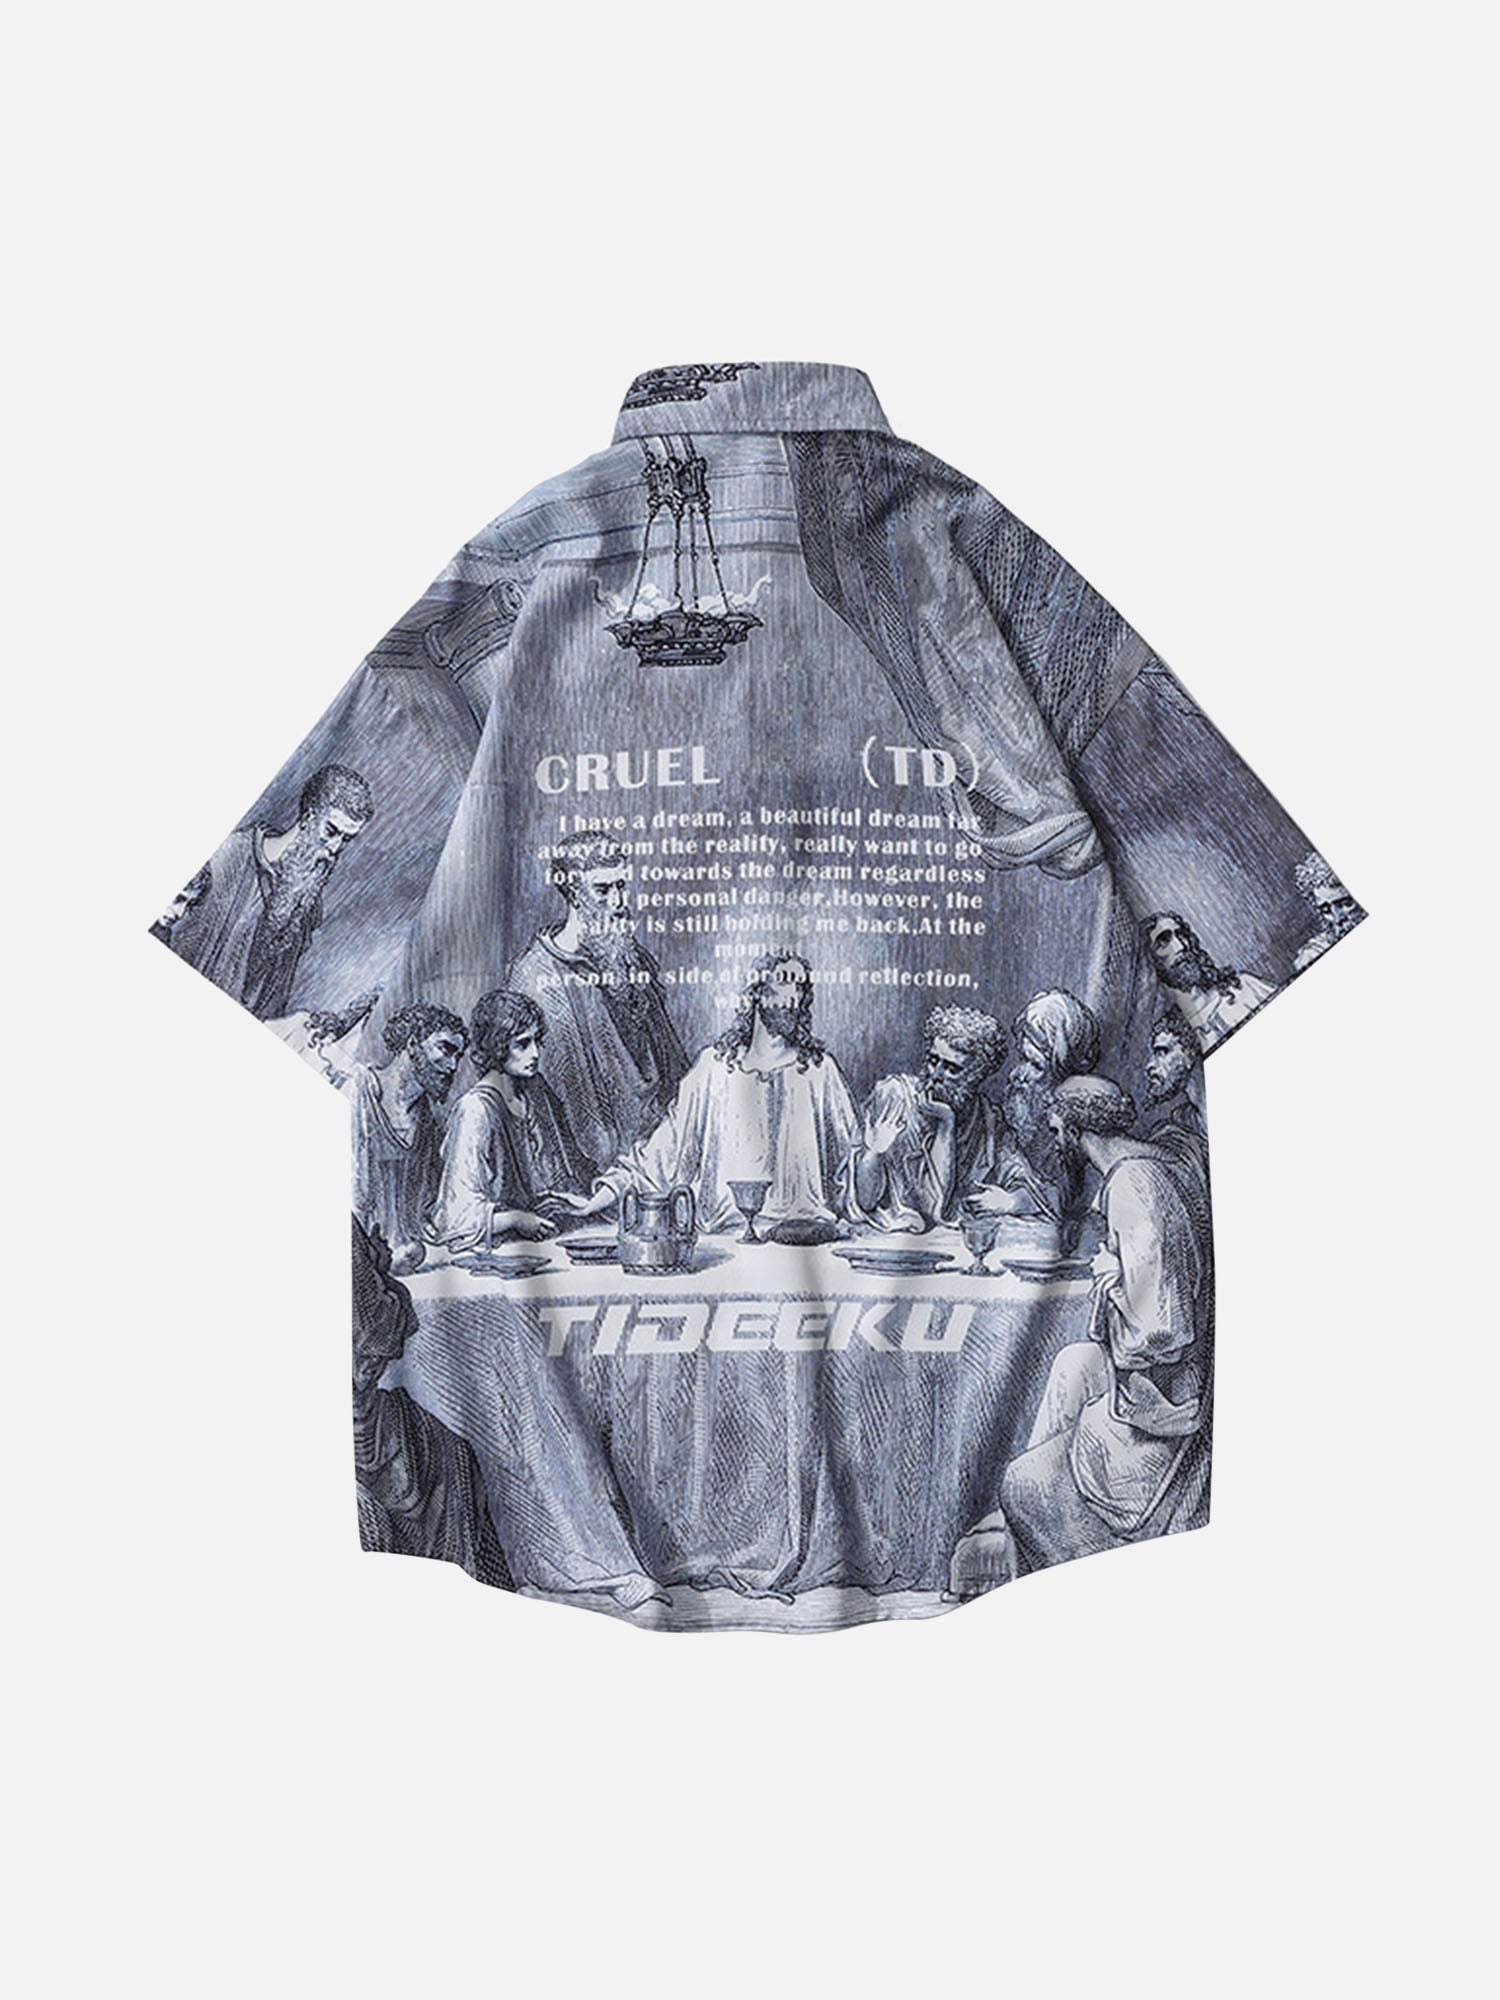 Thesupermade The Last Supper Printed Shirts